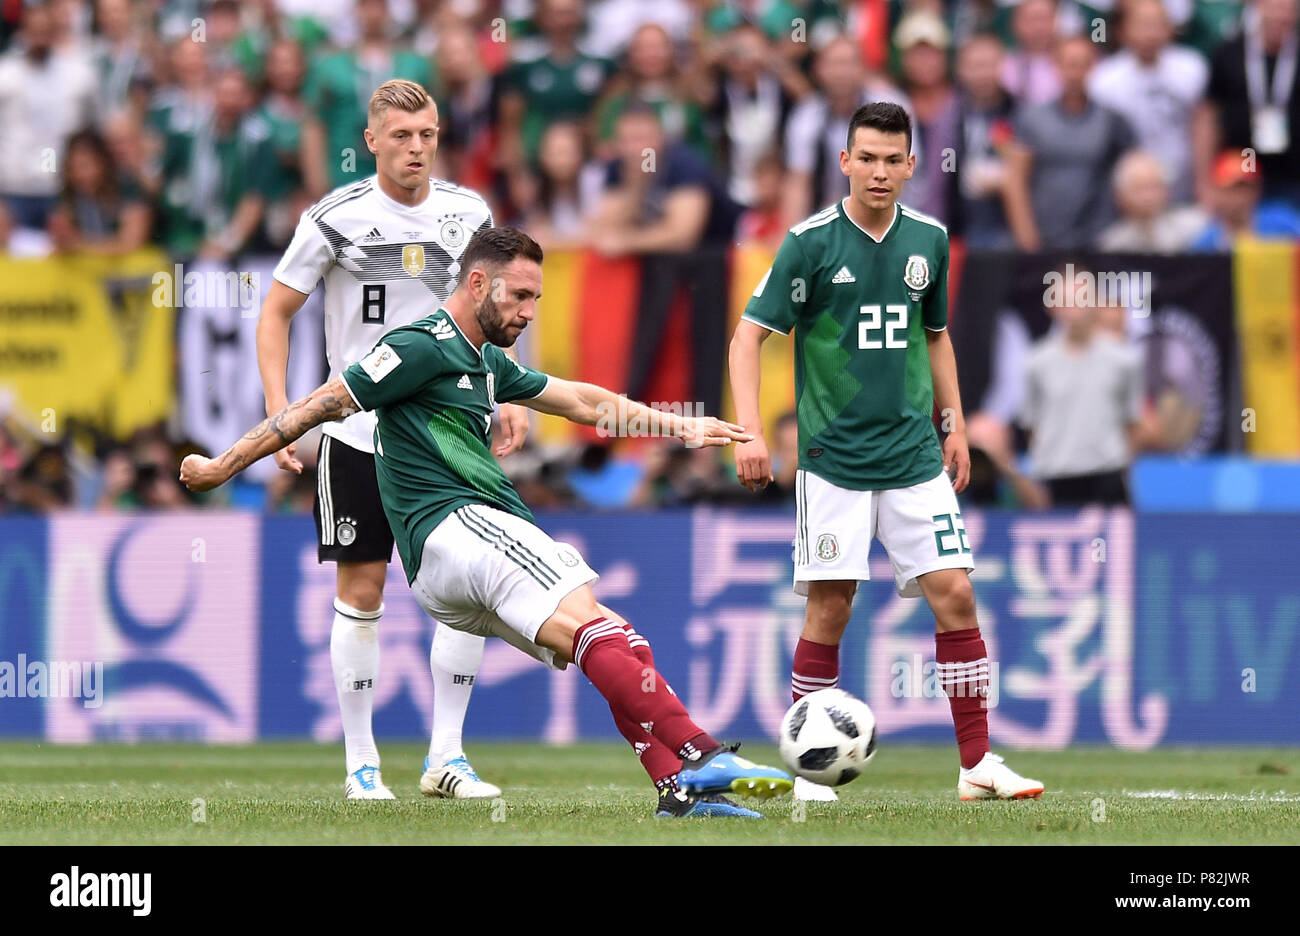 MOSCOW, RUSSIA - JUNE 17: Miguel Layun of Mexico in action during the 2018 FIFA World Cup Russia group F match between Germany and Mexico at Luzhniki Stadium on June 17, 2018 in Moscow, Russia. (Photo by Lukasz Laskowski/PressFocus/MB Media) Stock Photo